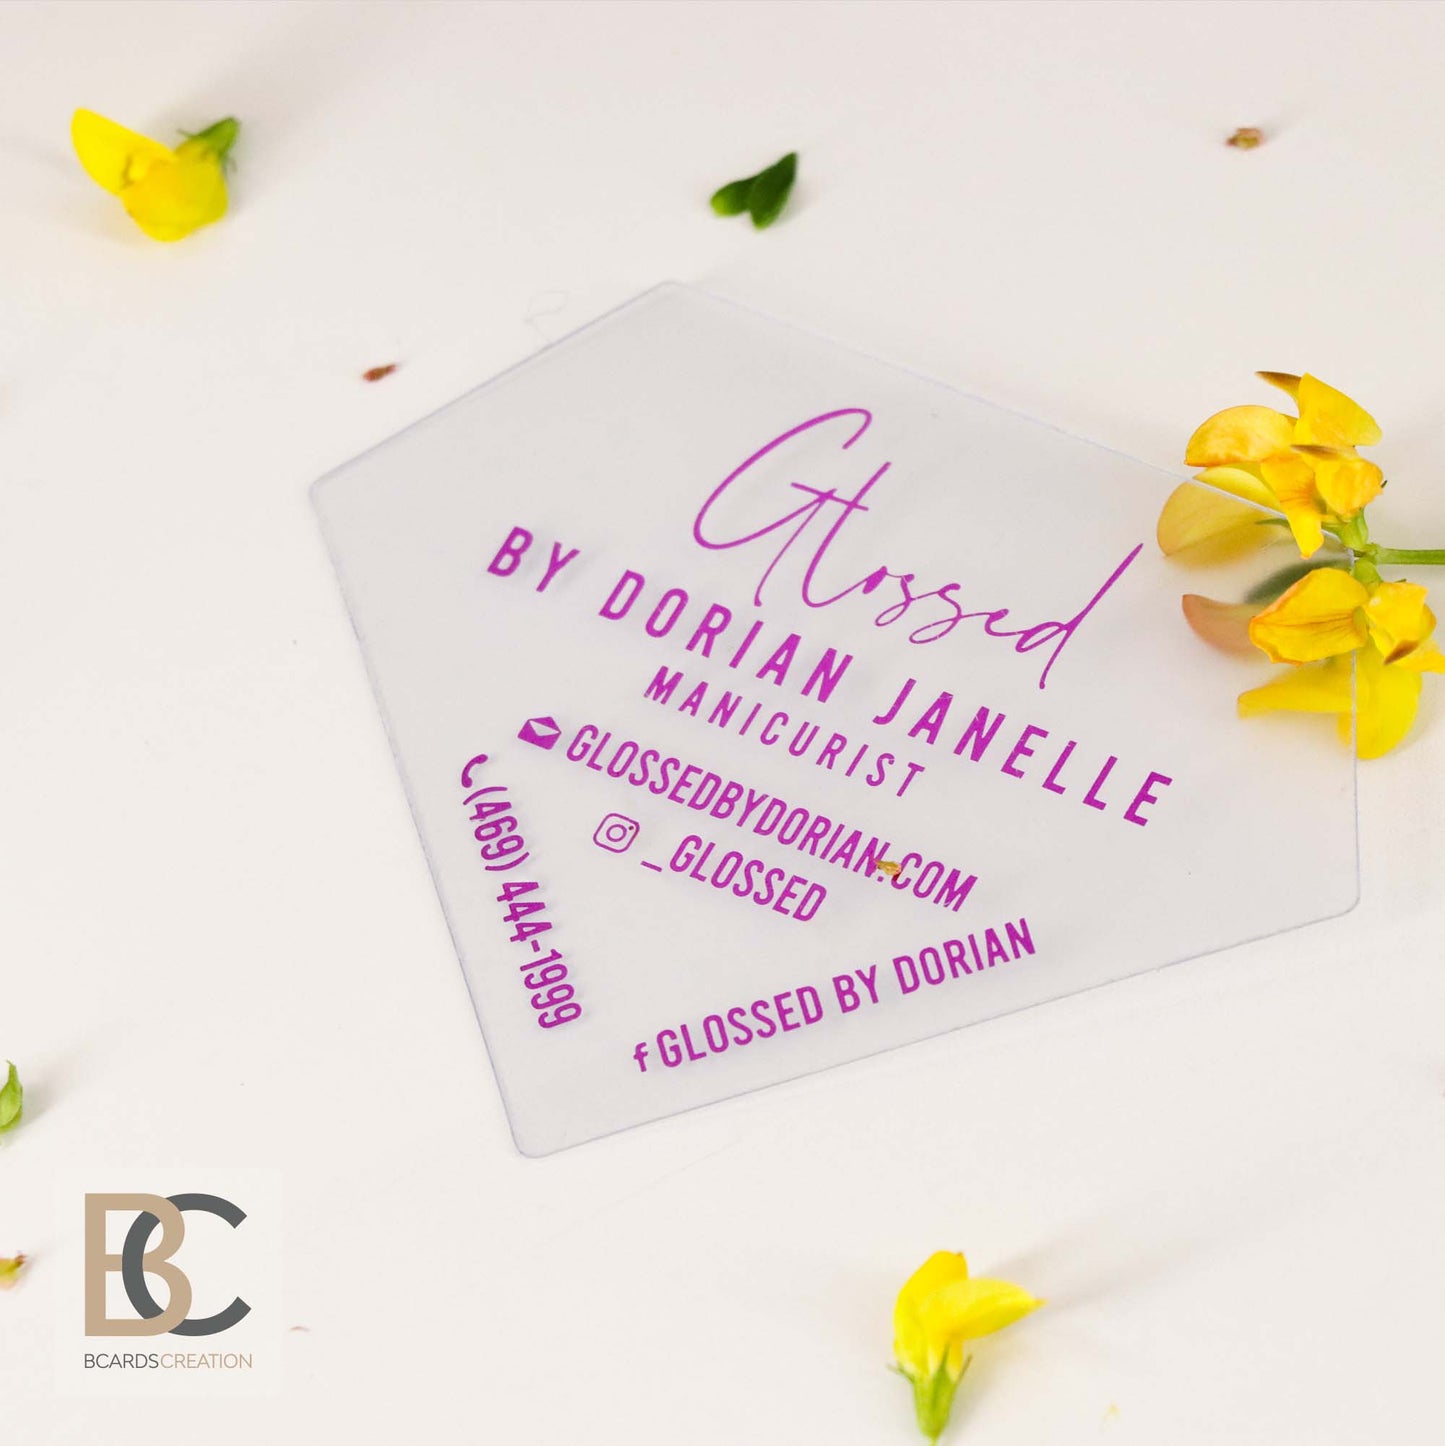 Diamond Custom Shaped Business Cards | Frosted Plastic | Foil Stamping